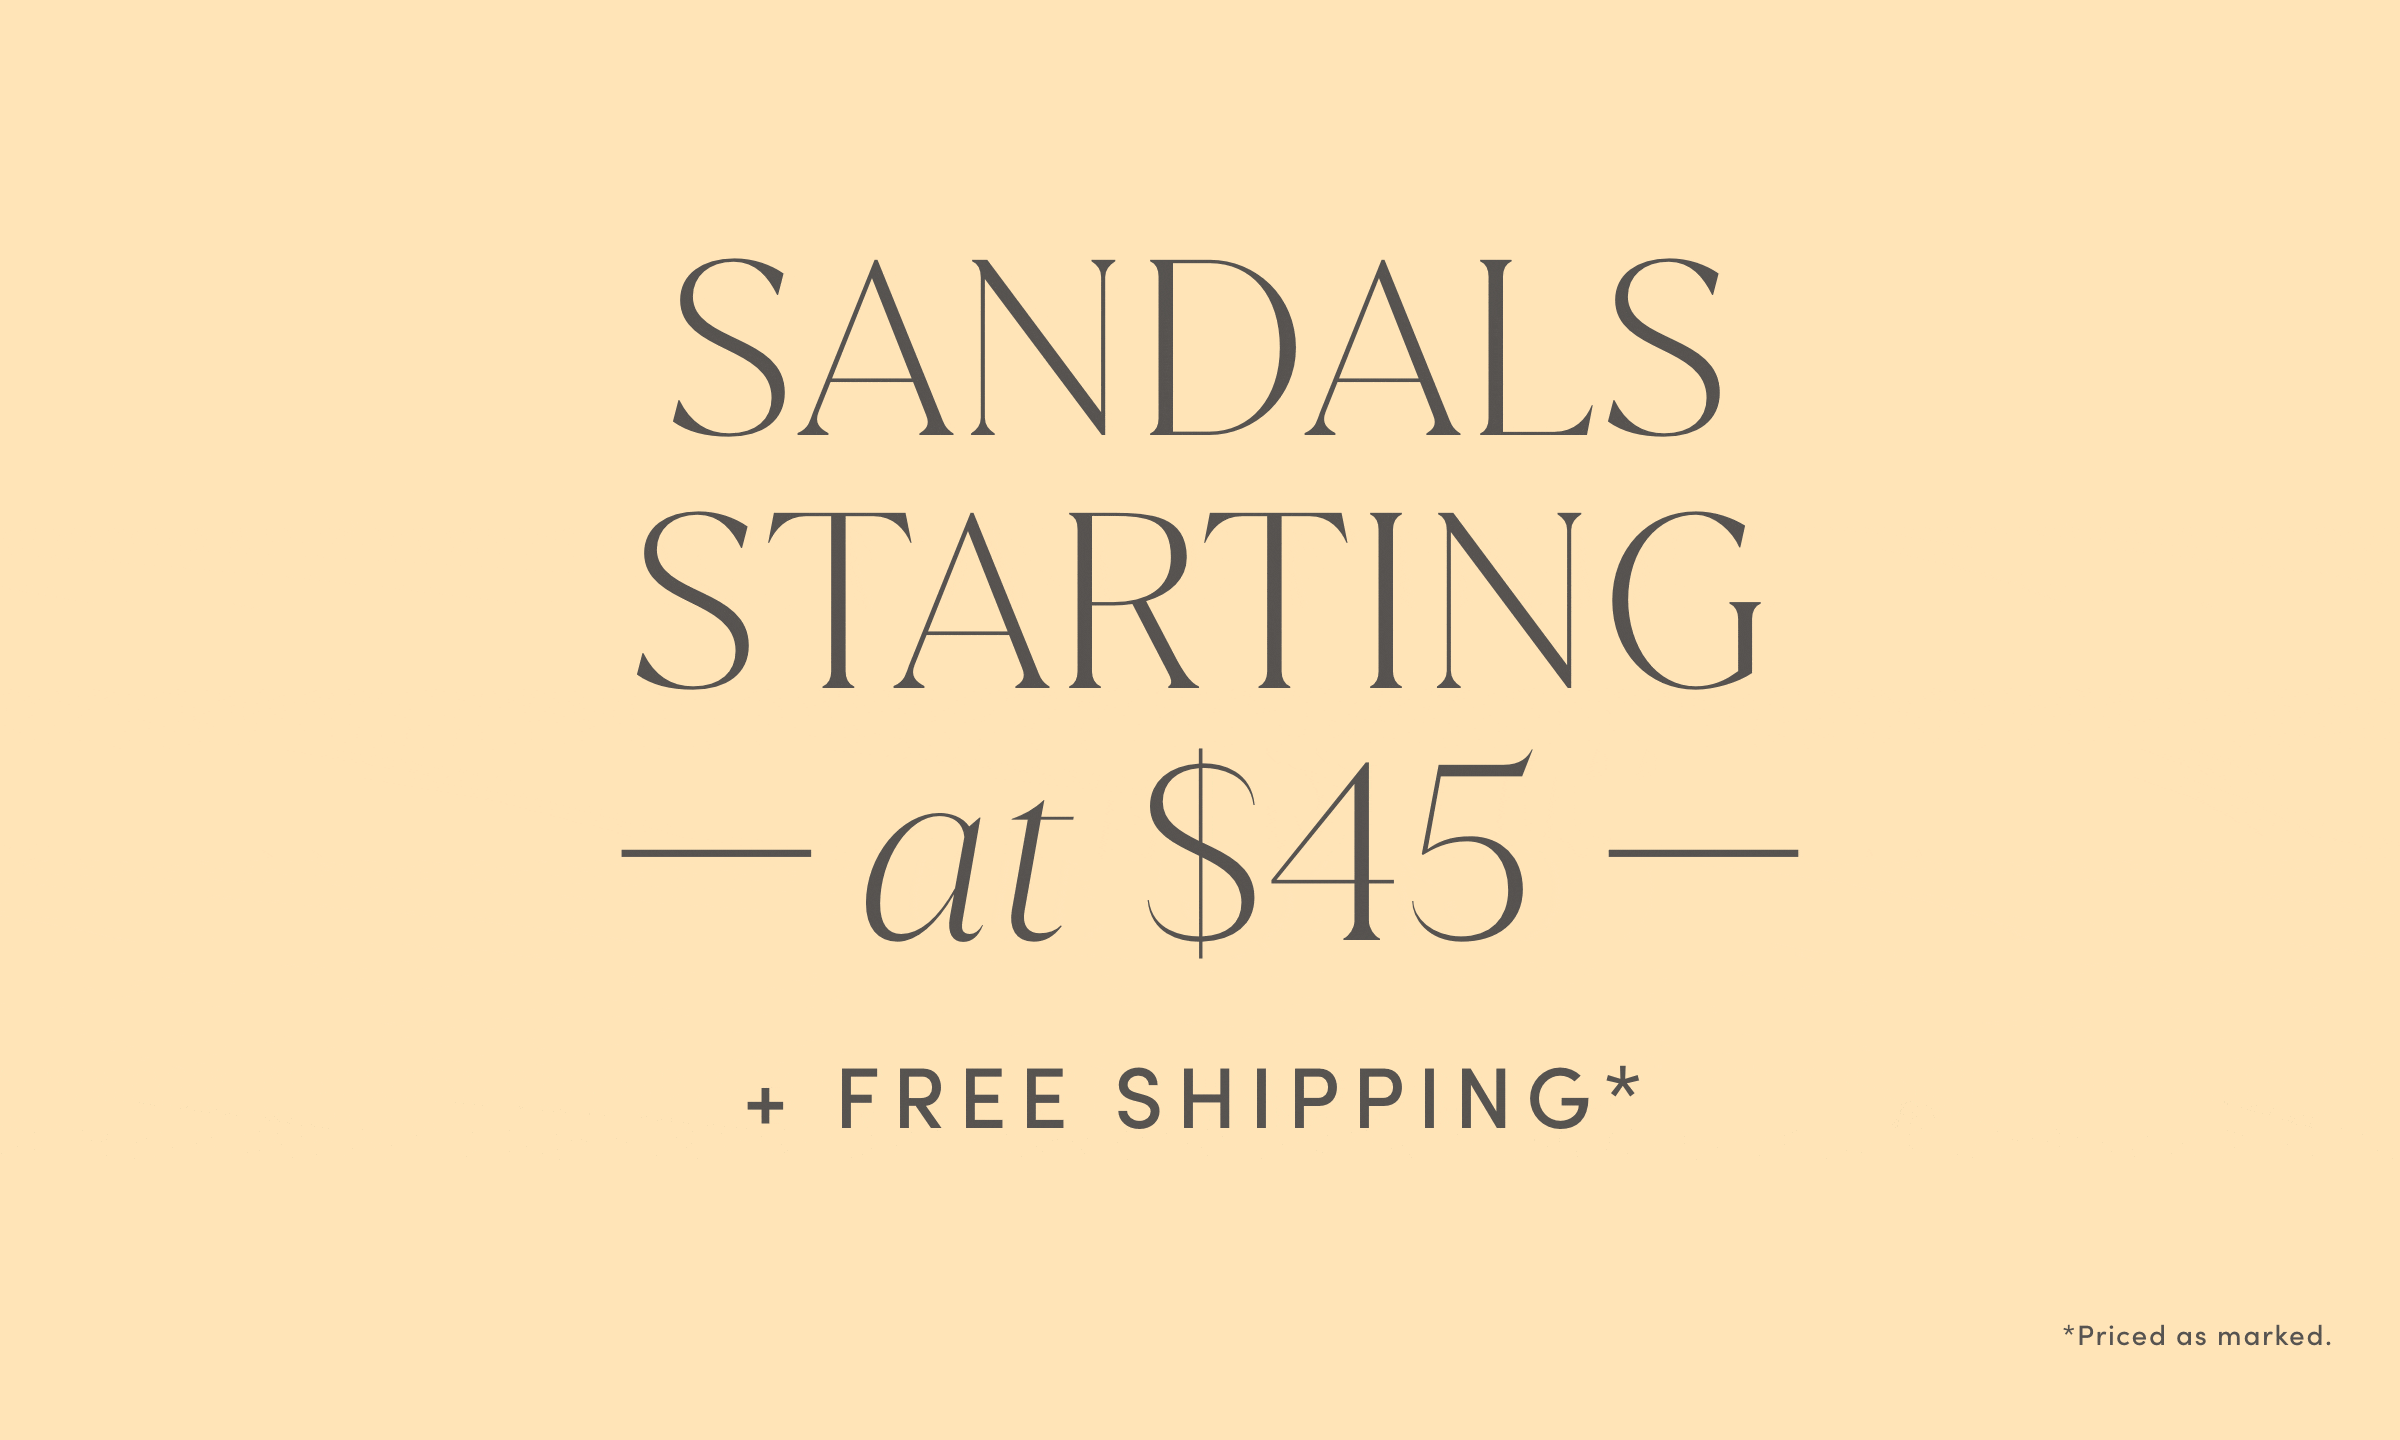 Sandals Starting at $45 + Free Shipping